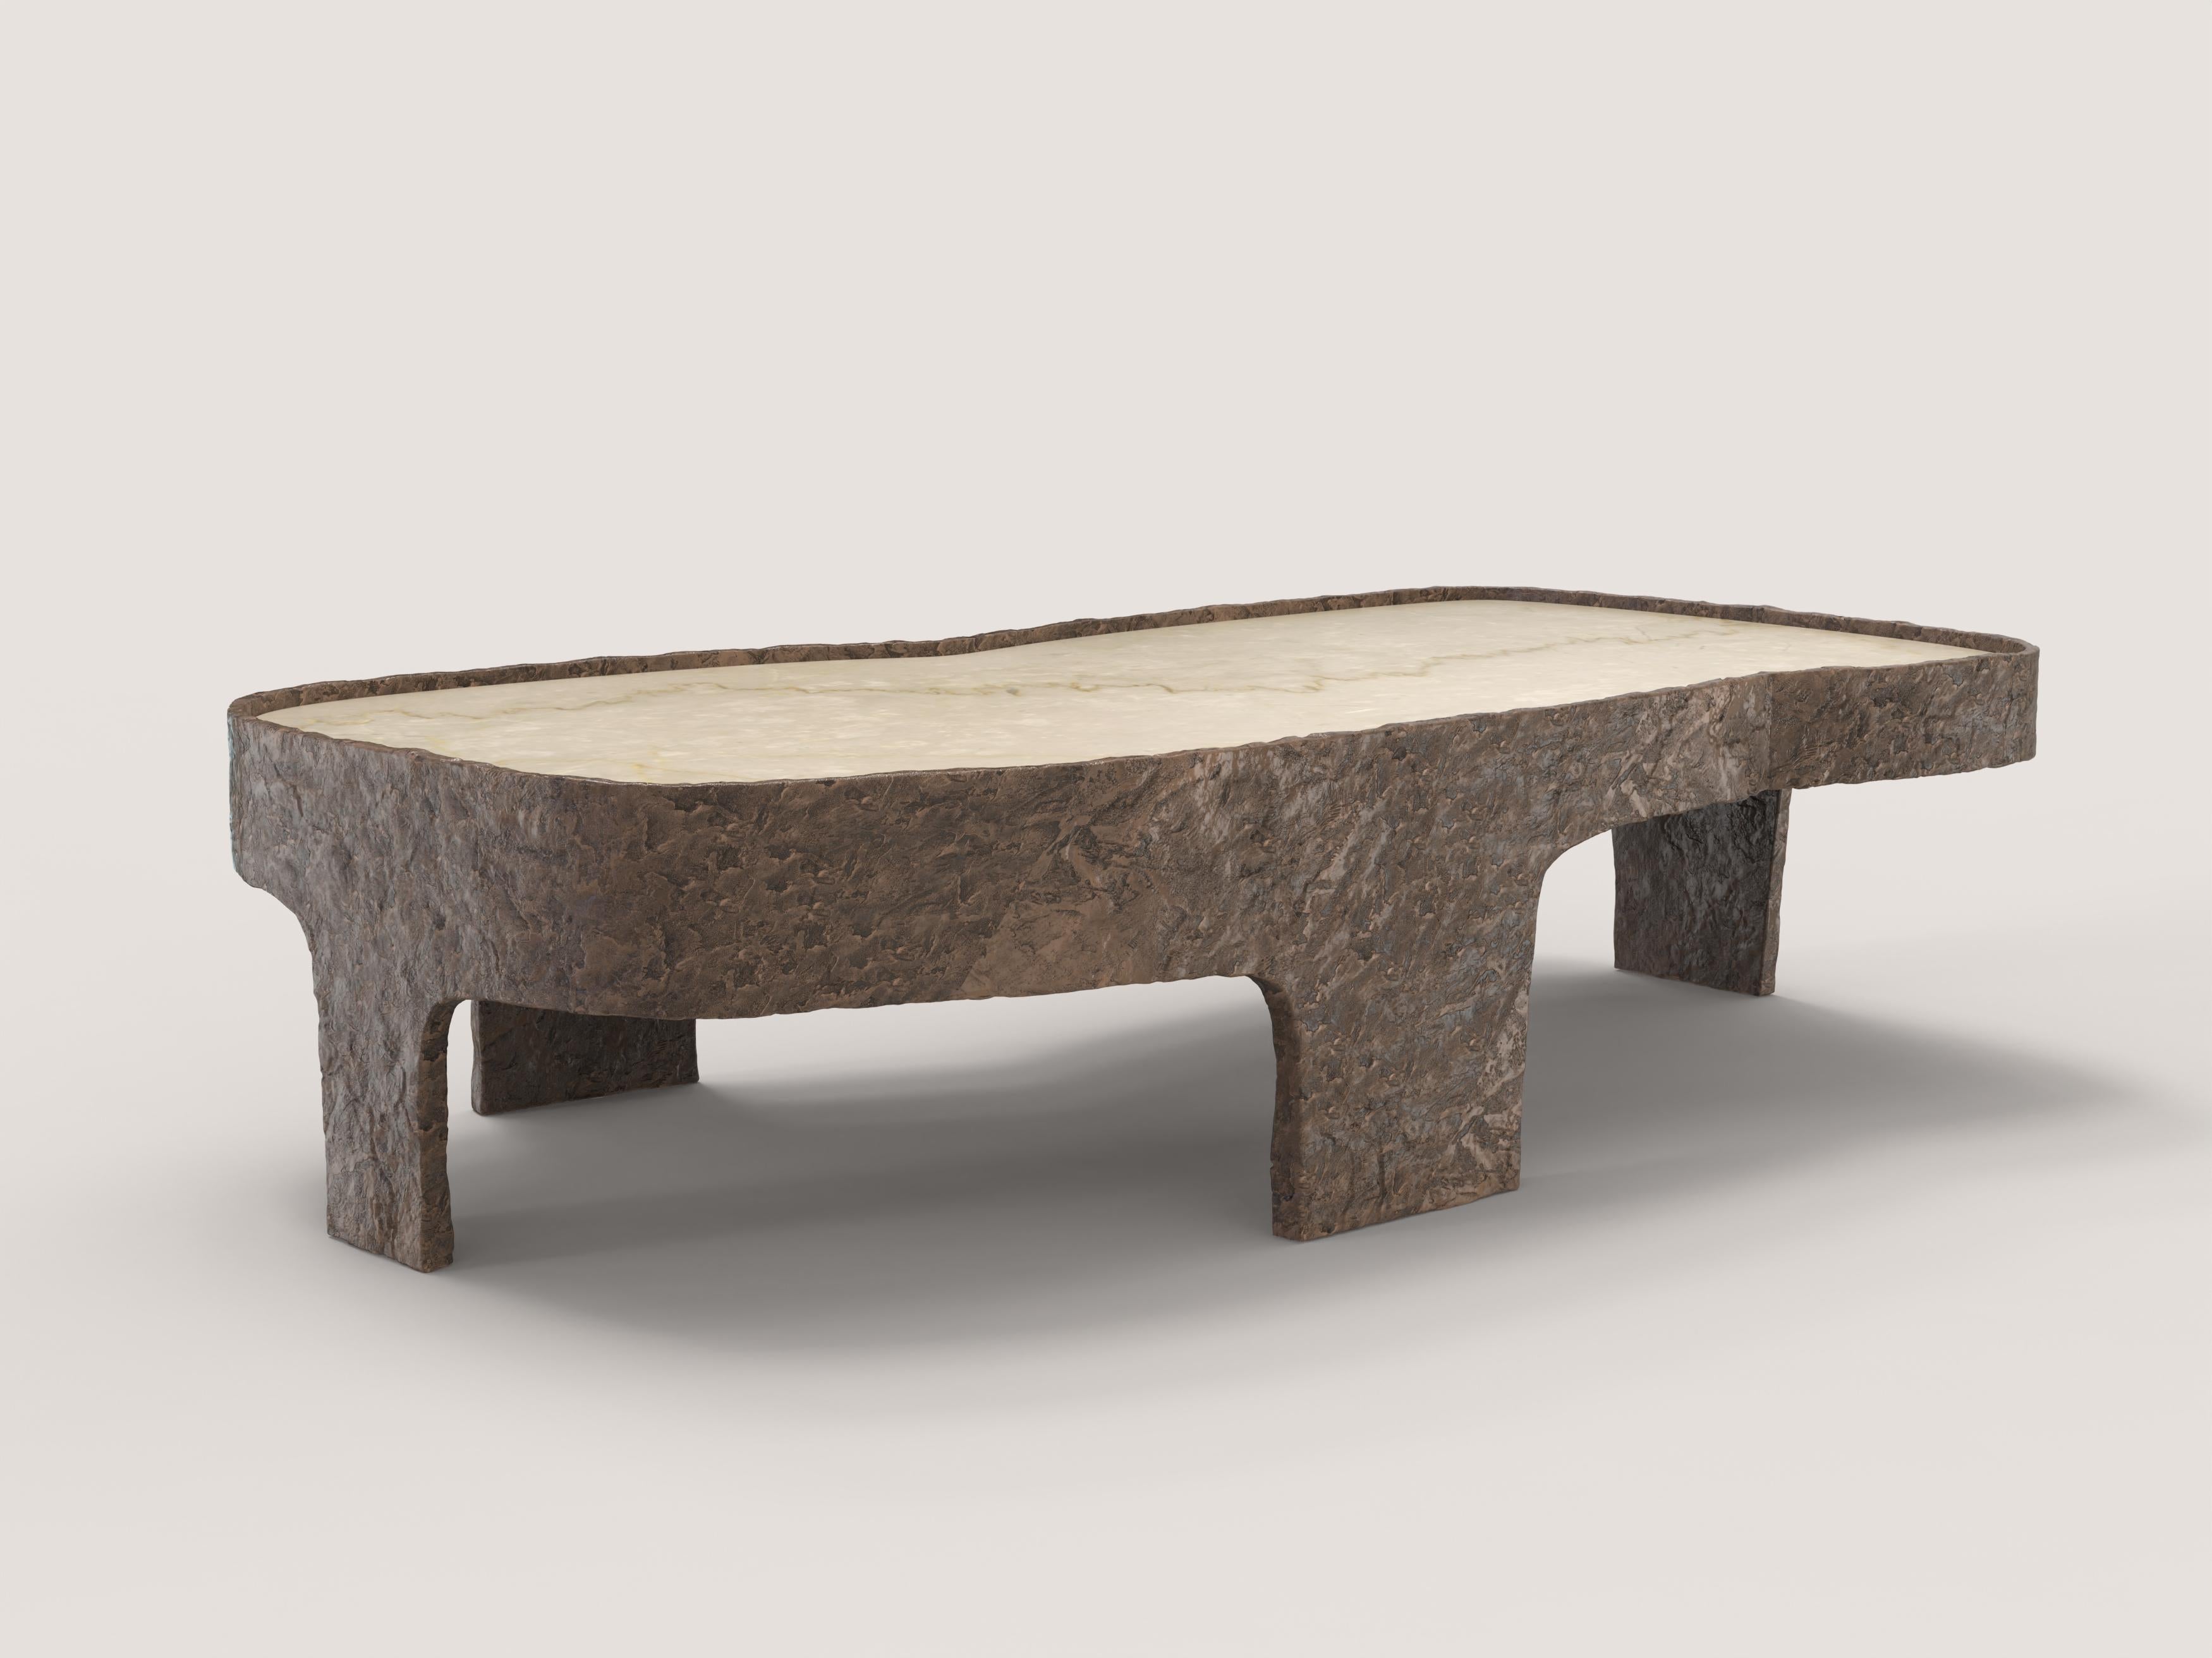 Limited Edition Marble Bronze Table, Sumatra V3 by Edizione Limitata In New Condition For Sale In Milano, IT